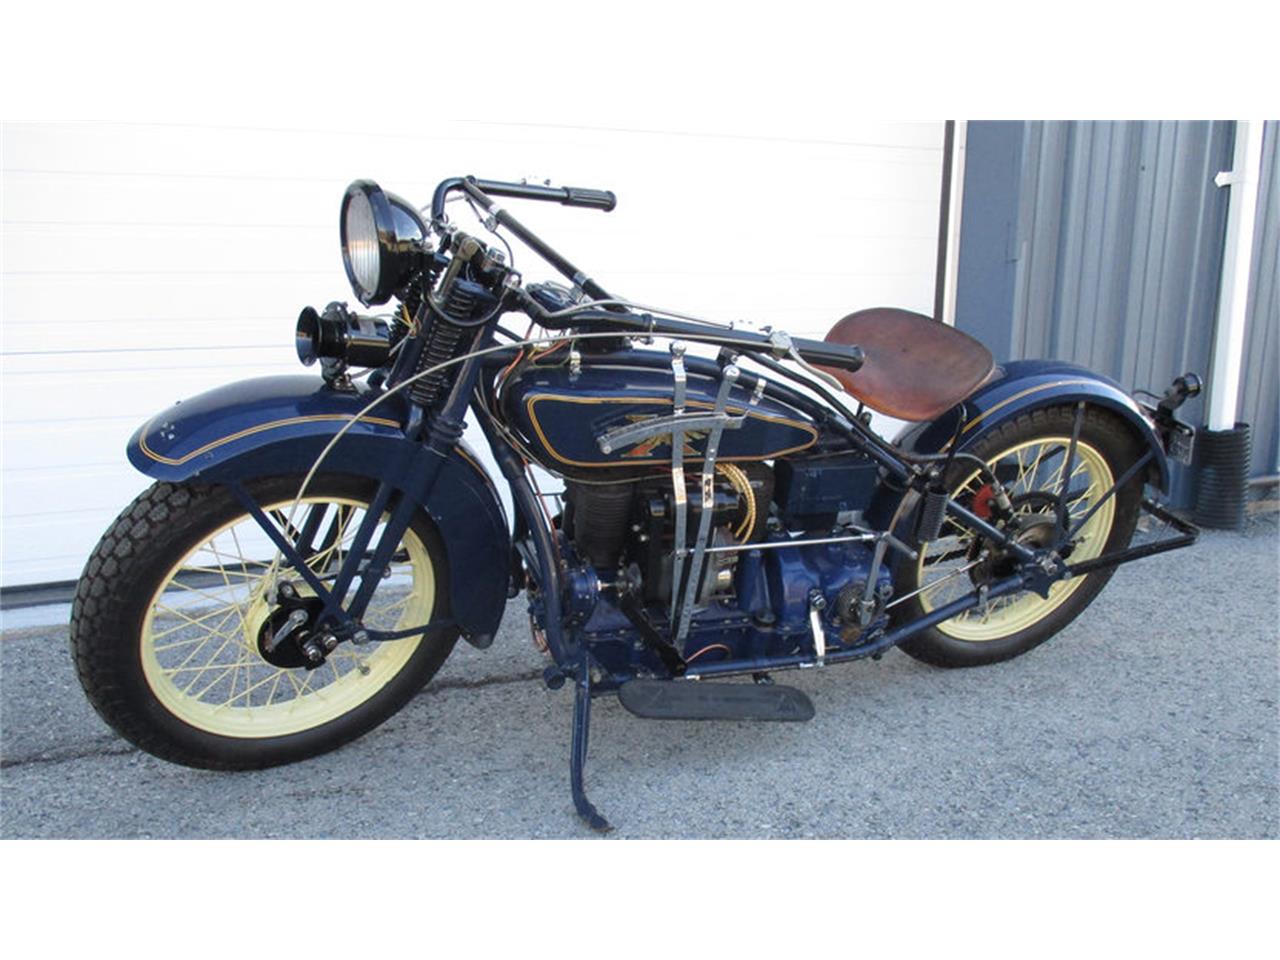 1928 Henderson Motorcycle For Sale Classiccars Com Cc 929874